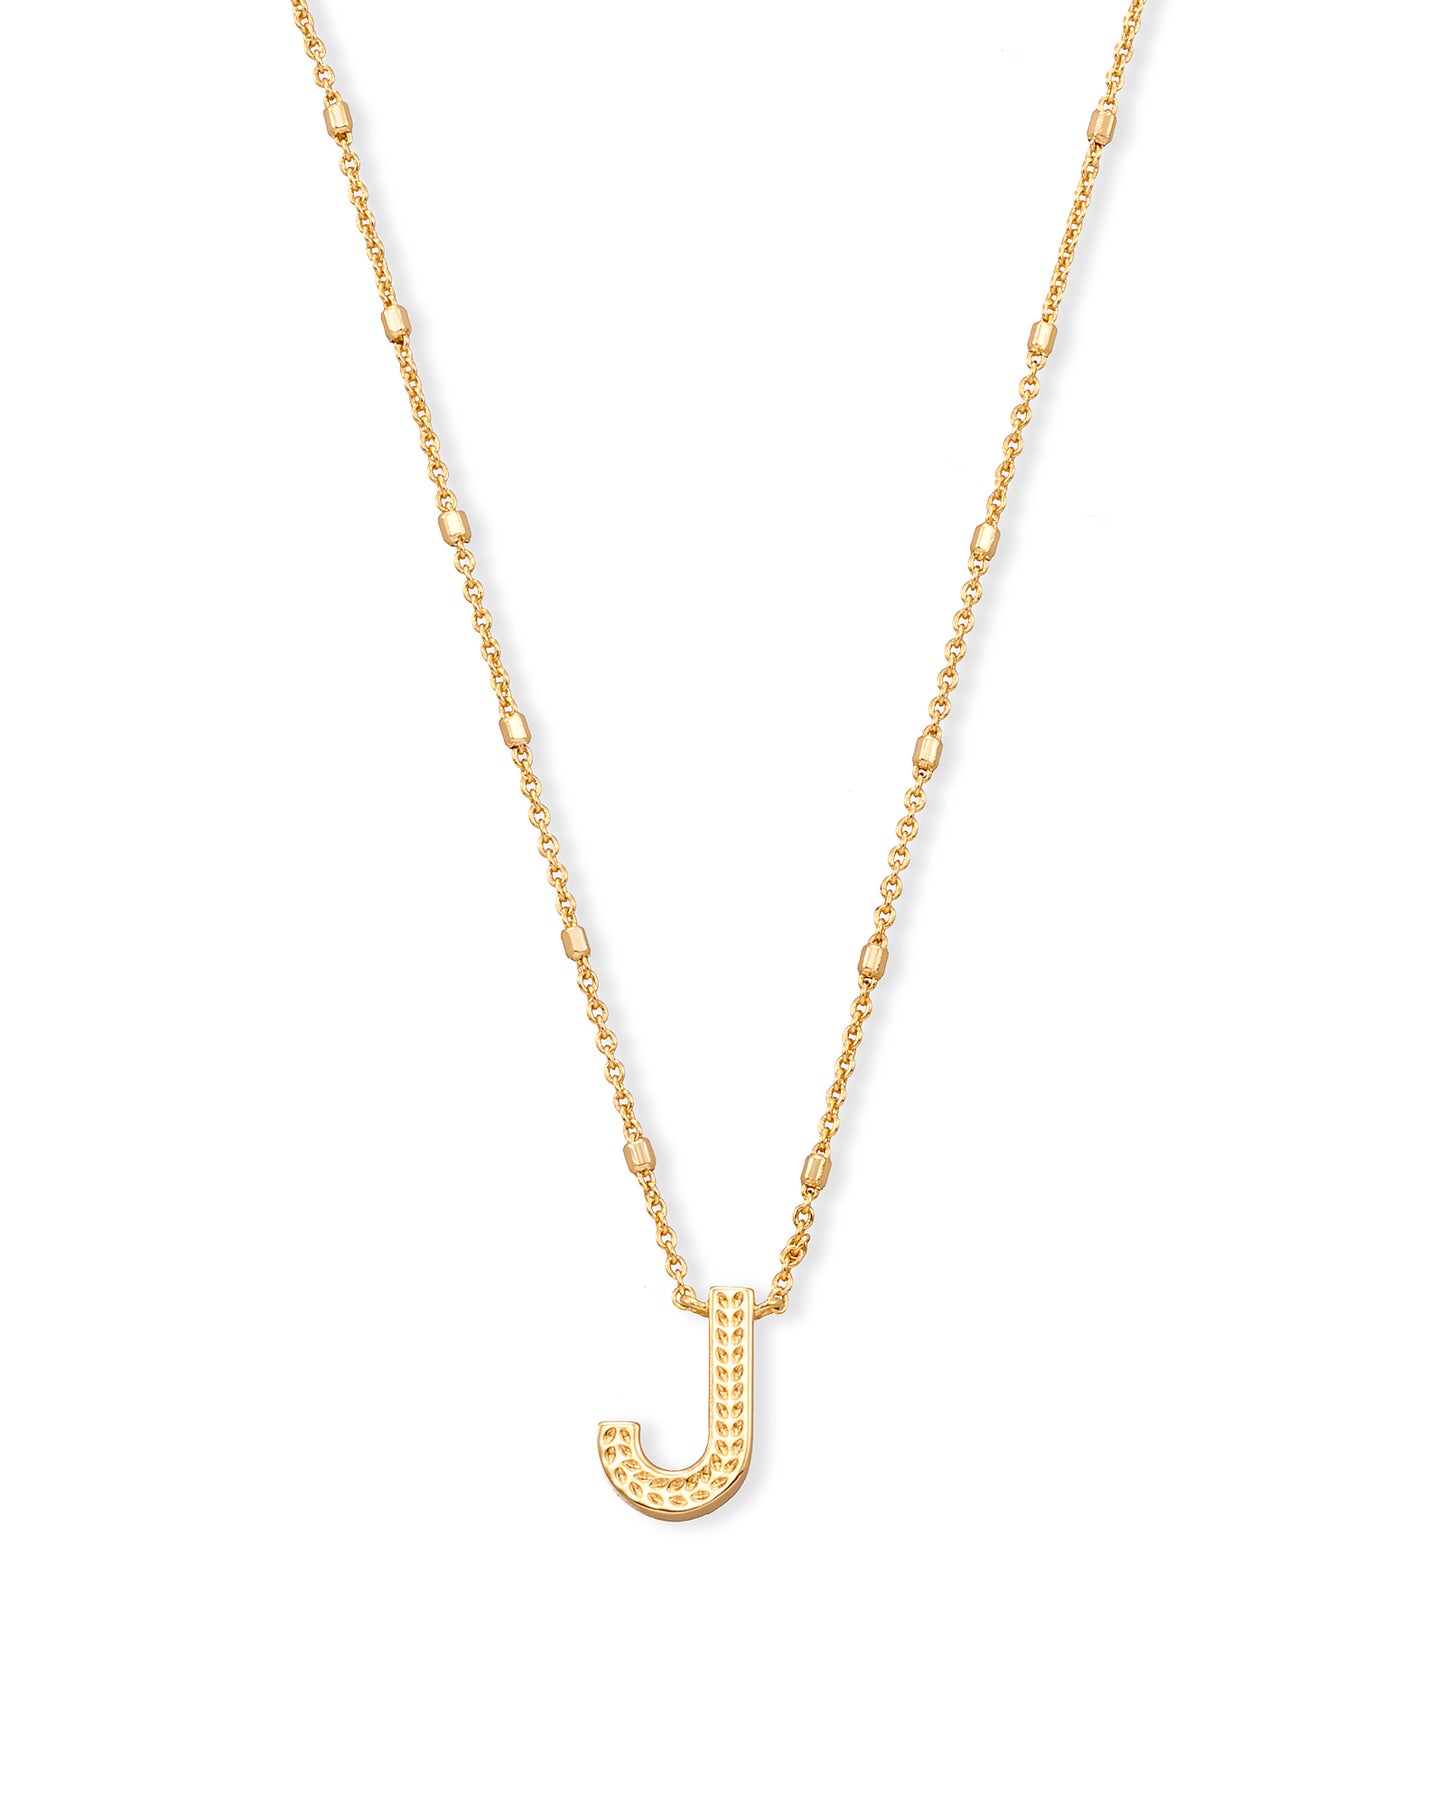 KENDRA SCOTT: Initial Necklace in Gold